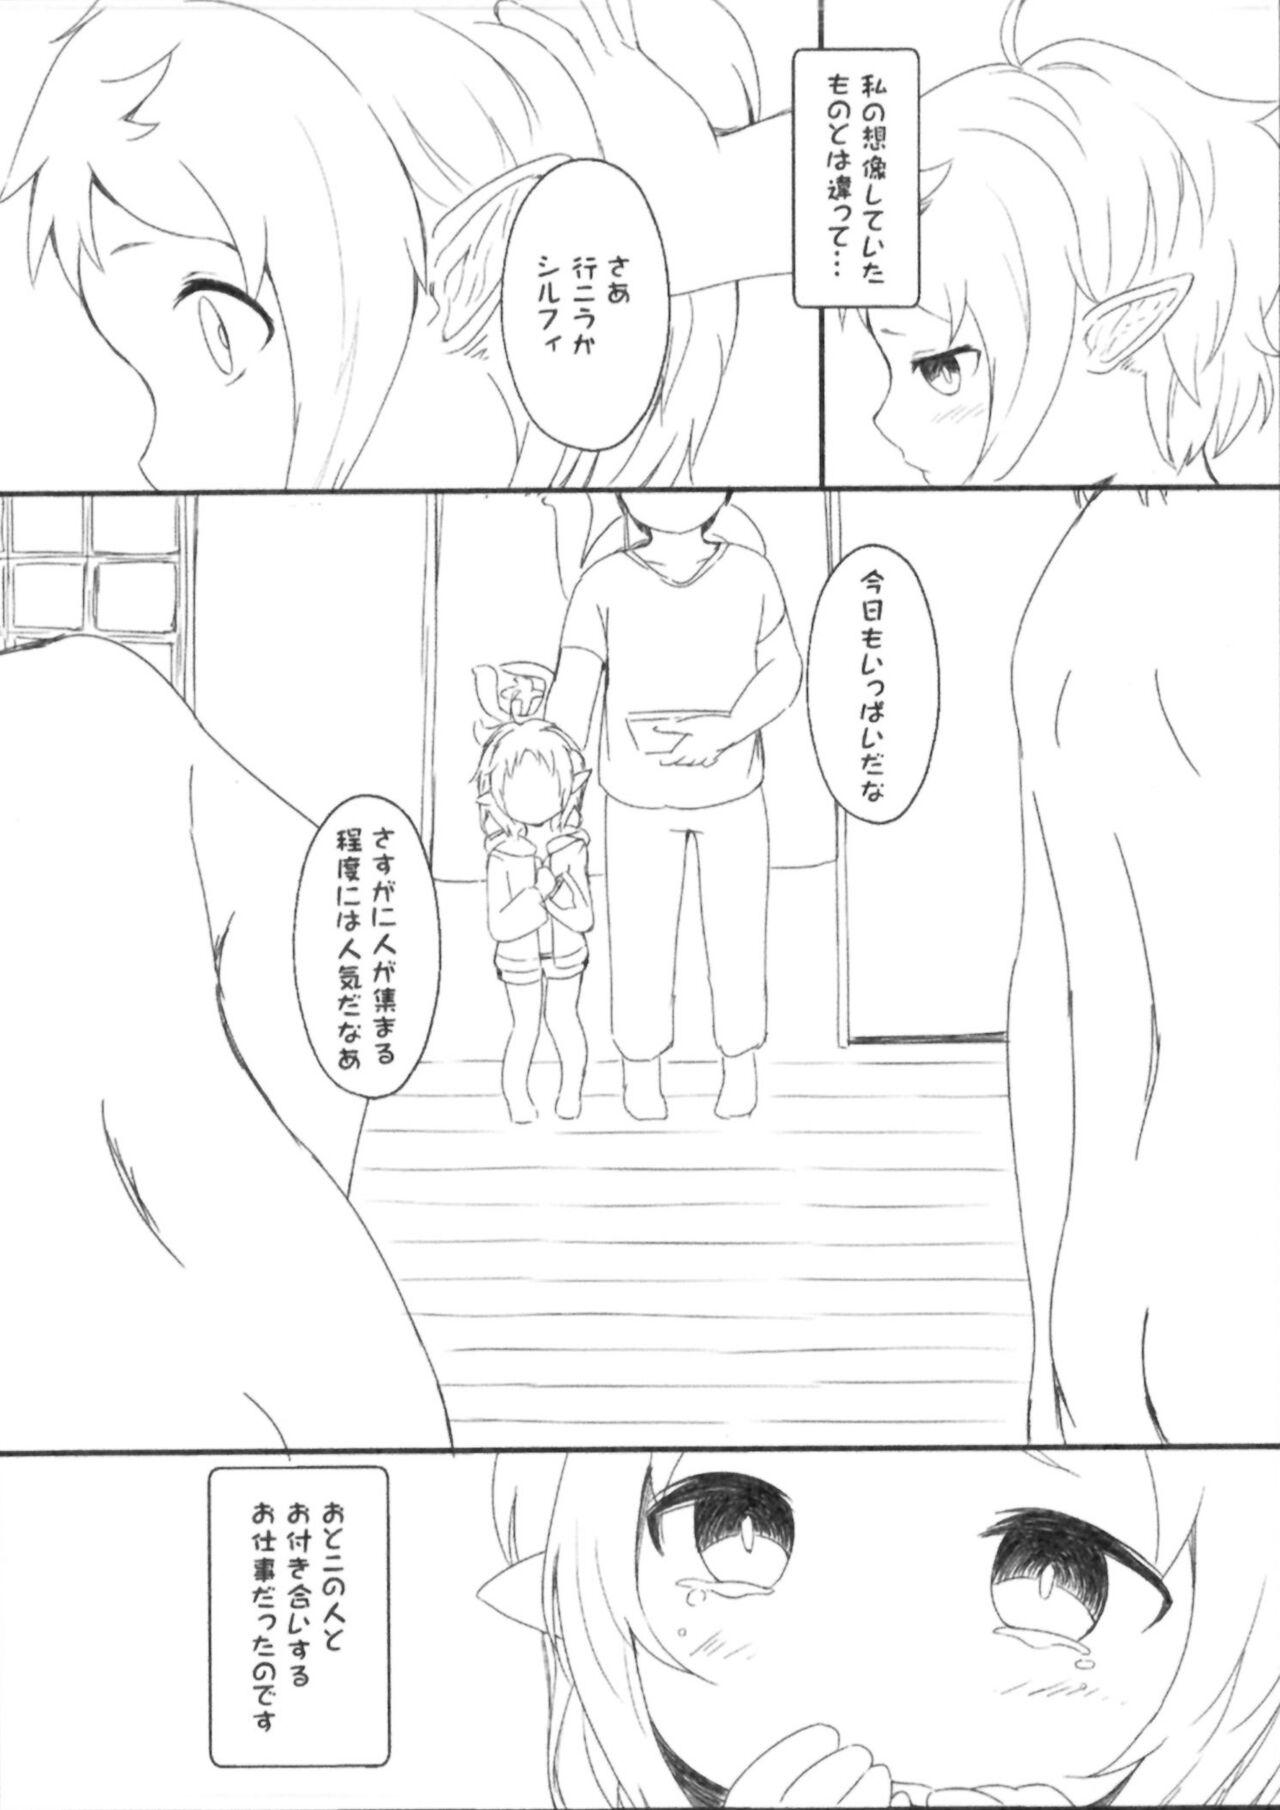 Stranger I want to take a bath with Sylphyt! - Mushoku tensei Gay Straight - Page 4